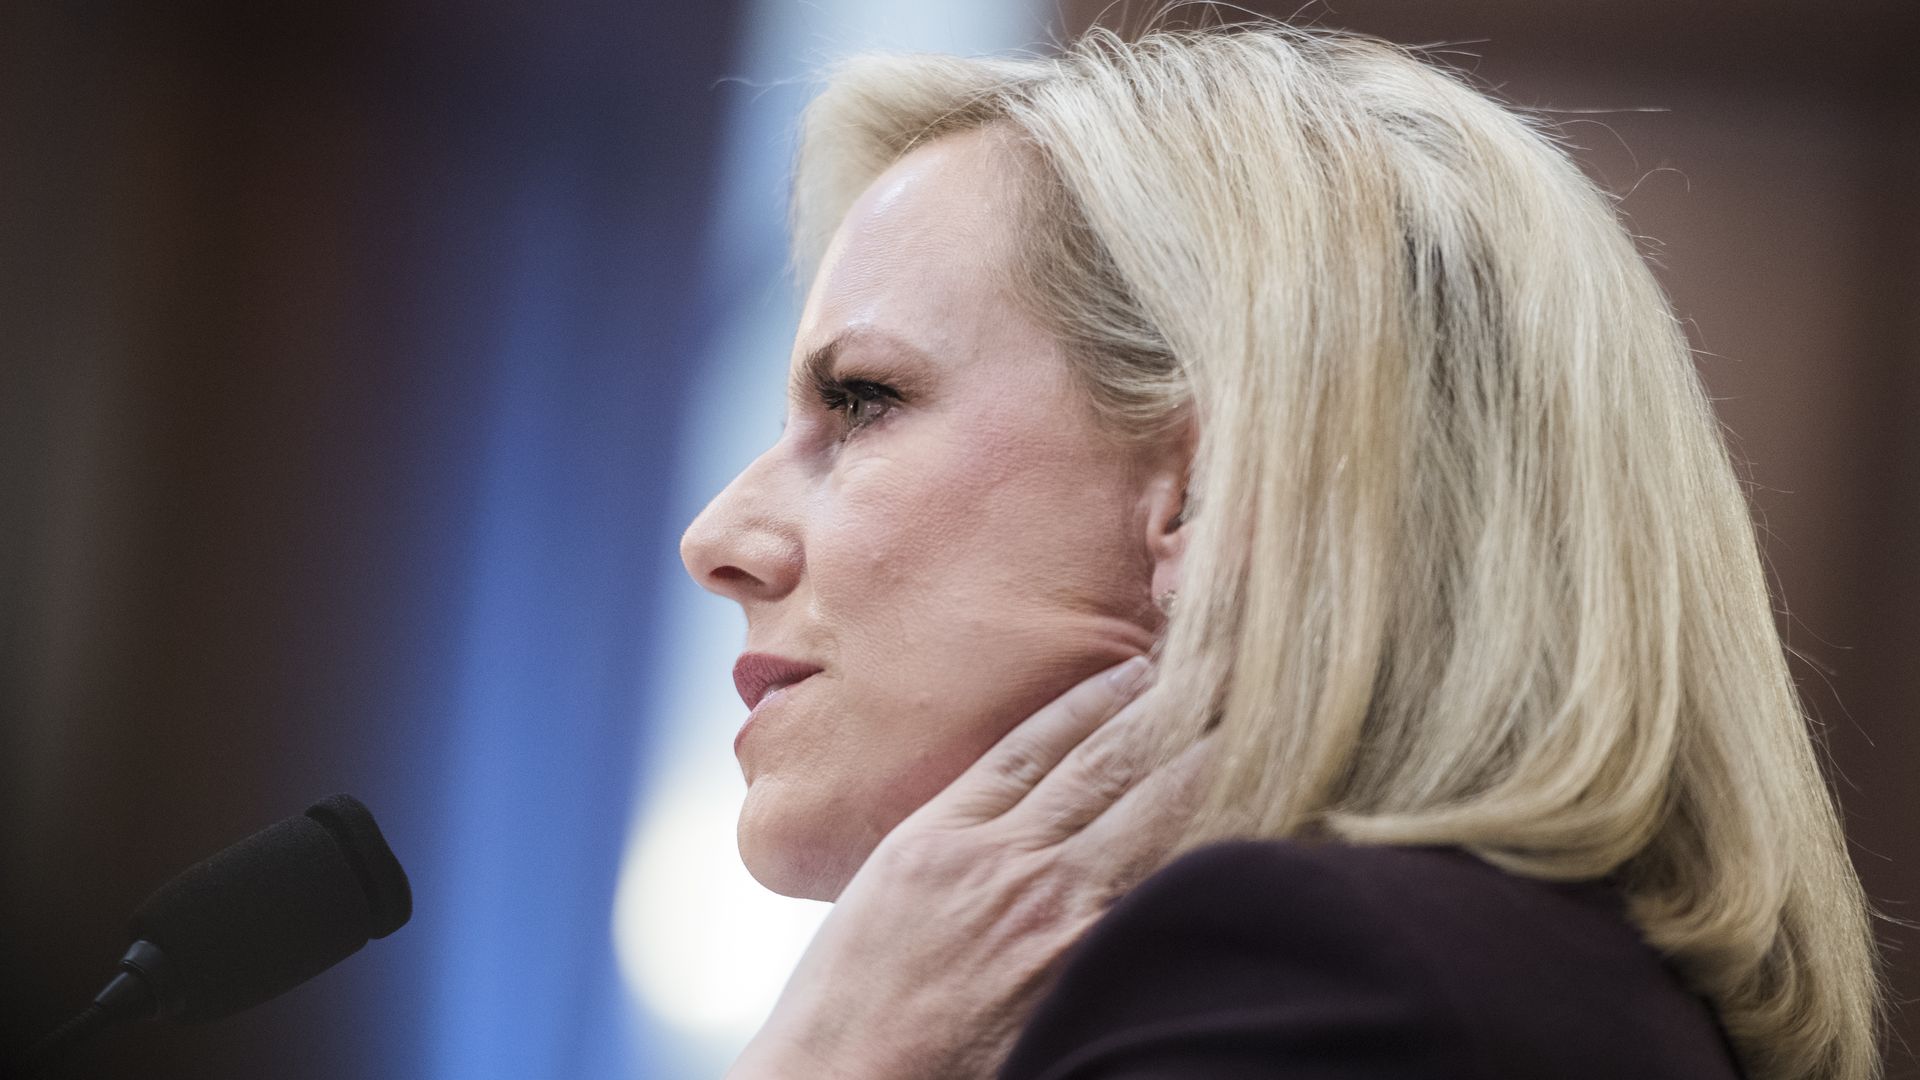 In this image, DHS Secretary Nielsen rubs her neck while sitting and listening in front of a microphone. 